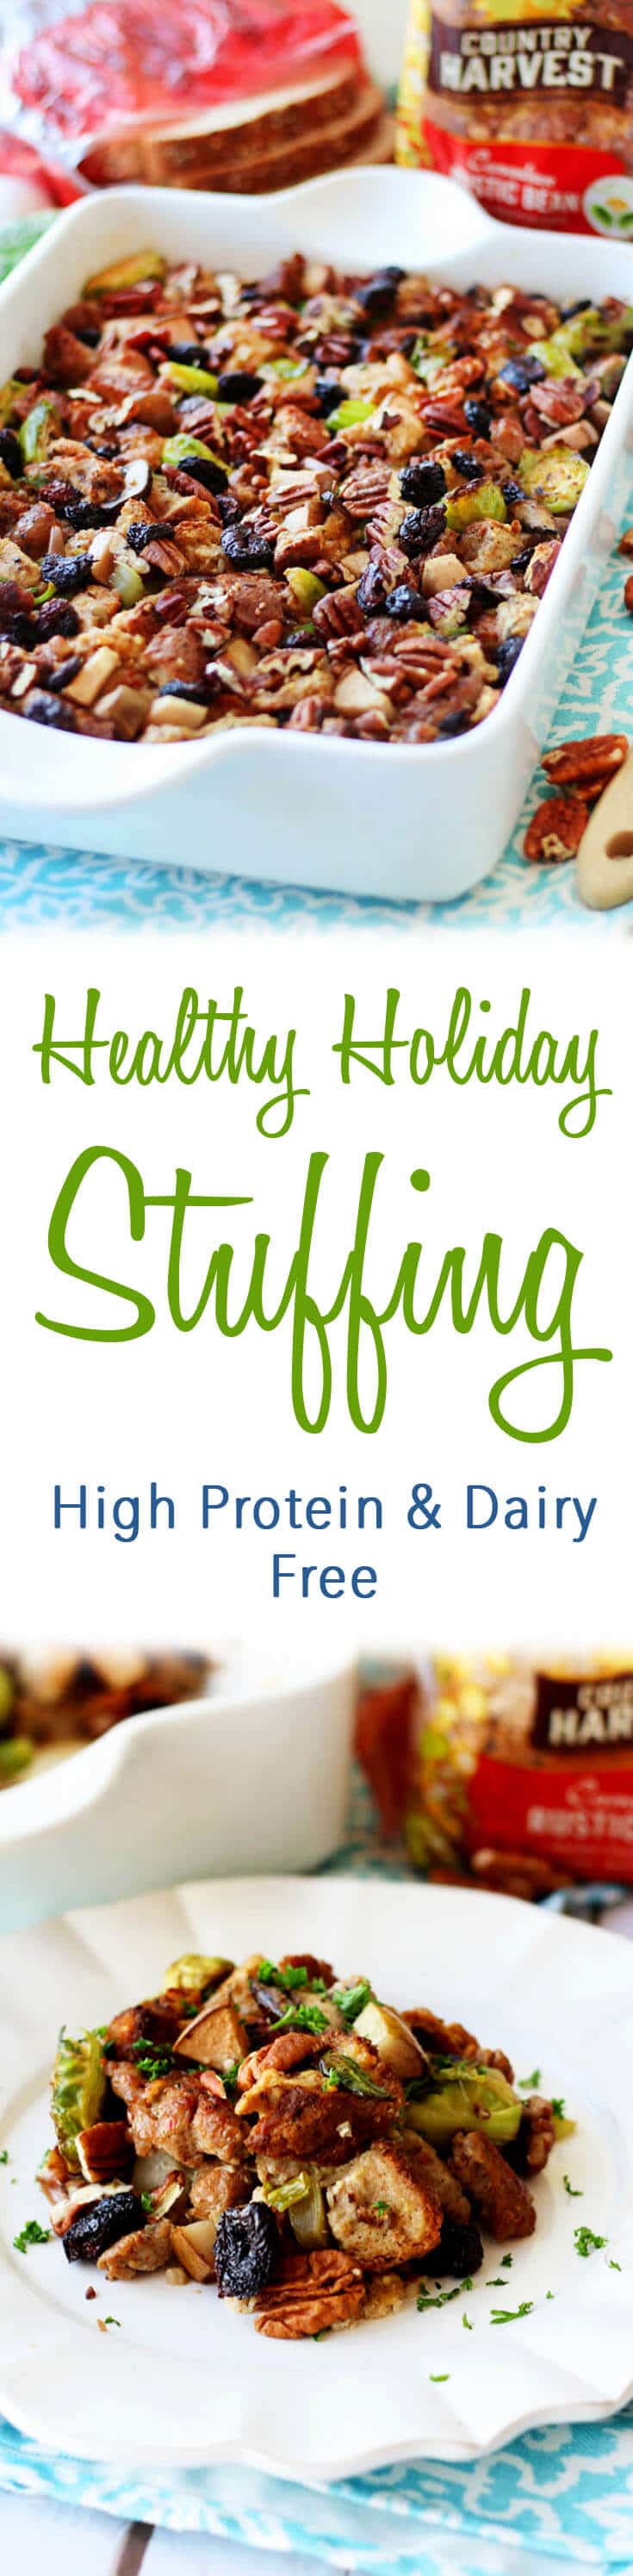 A pinterest image of stuffing with the text overlay \"Healthy Holiday Stuffing High Protein & Dairy Free.\"